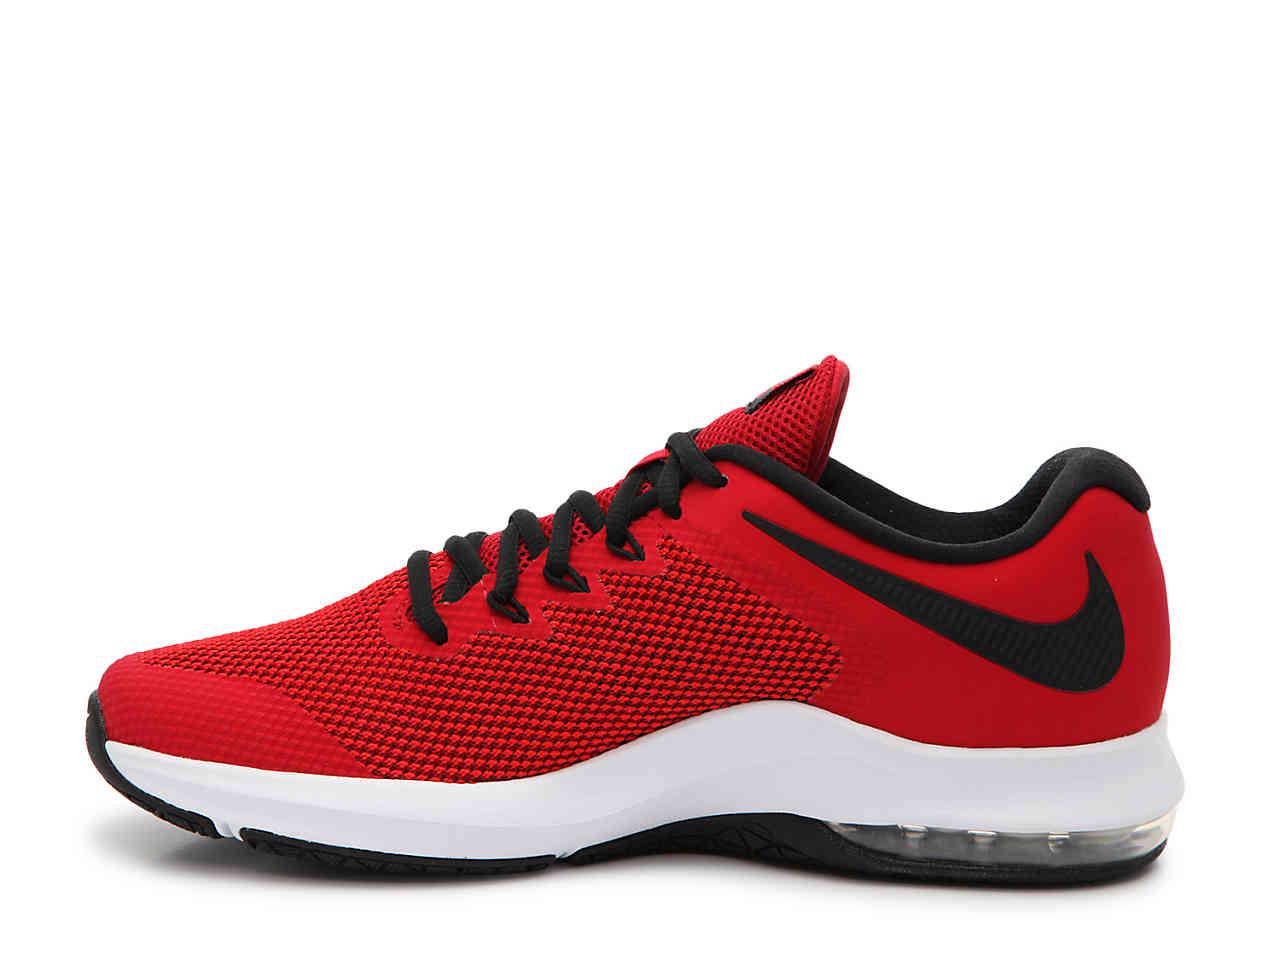  Nike  Synthetic Air  Max  Alpha Trainer Training Shoe  in Red 